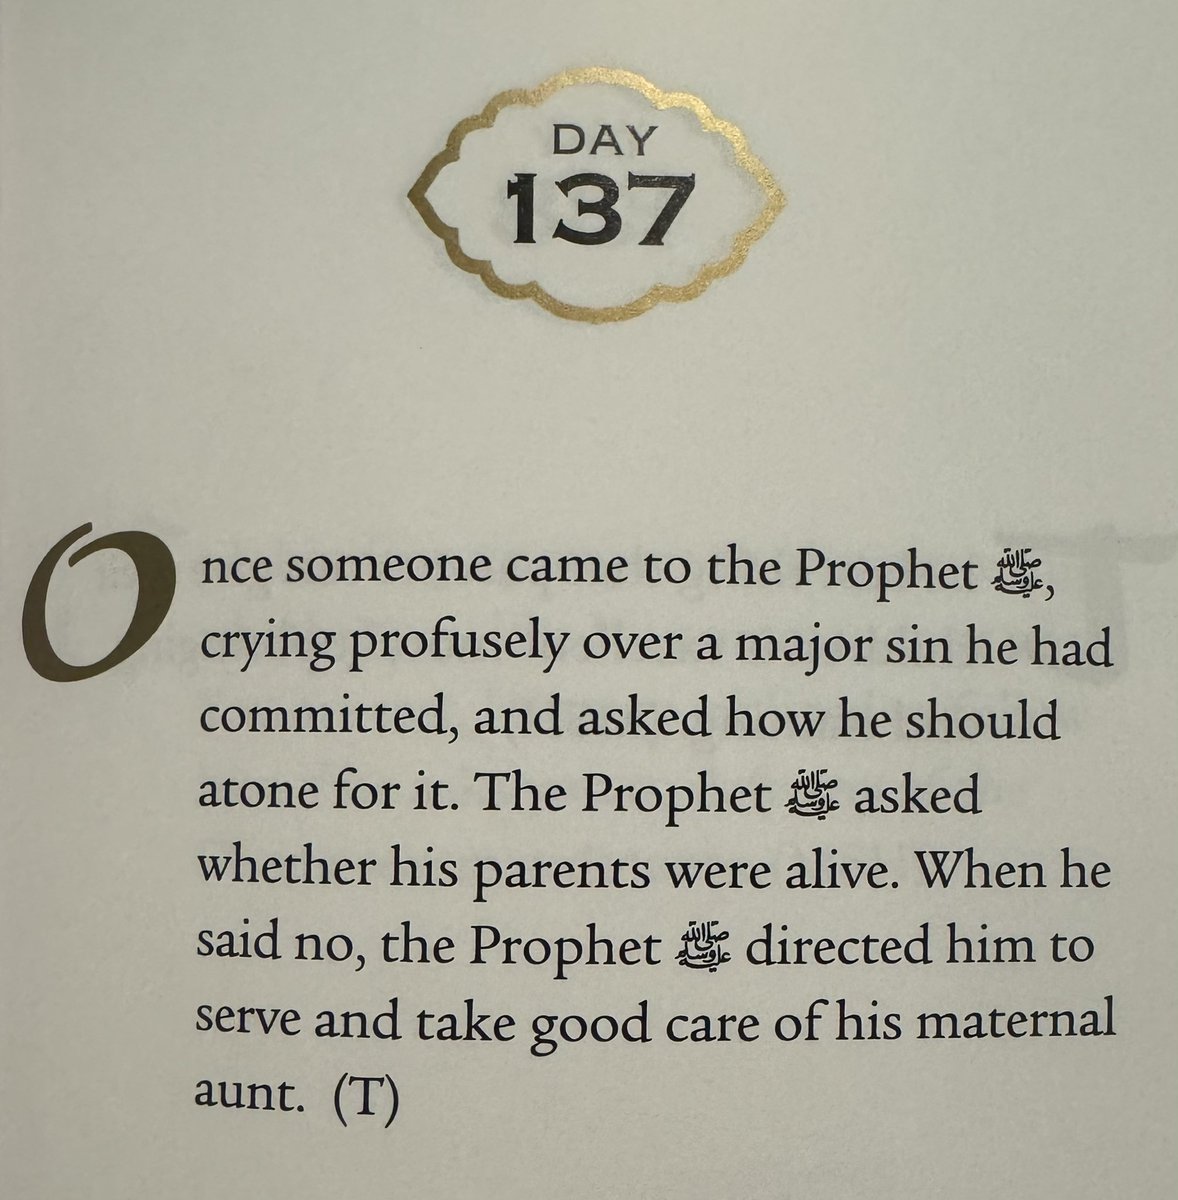 Hadith of the day.

once someone came to the Prophet Sallallahu ‘Alaihi Wa ‘Alihi Wa Salam , crying profusely over a major sin he had committed, and asked how he should atone for it. The Prophet Sallallahu ‘Alaihi Wa ‘Alihi Wa Salam  asked whether his parents were alive.